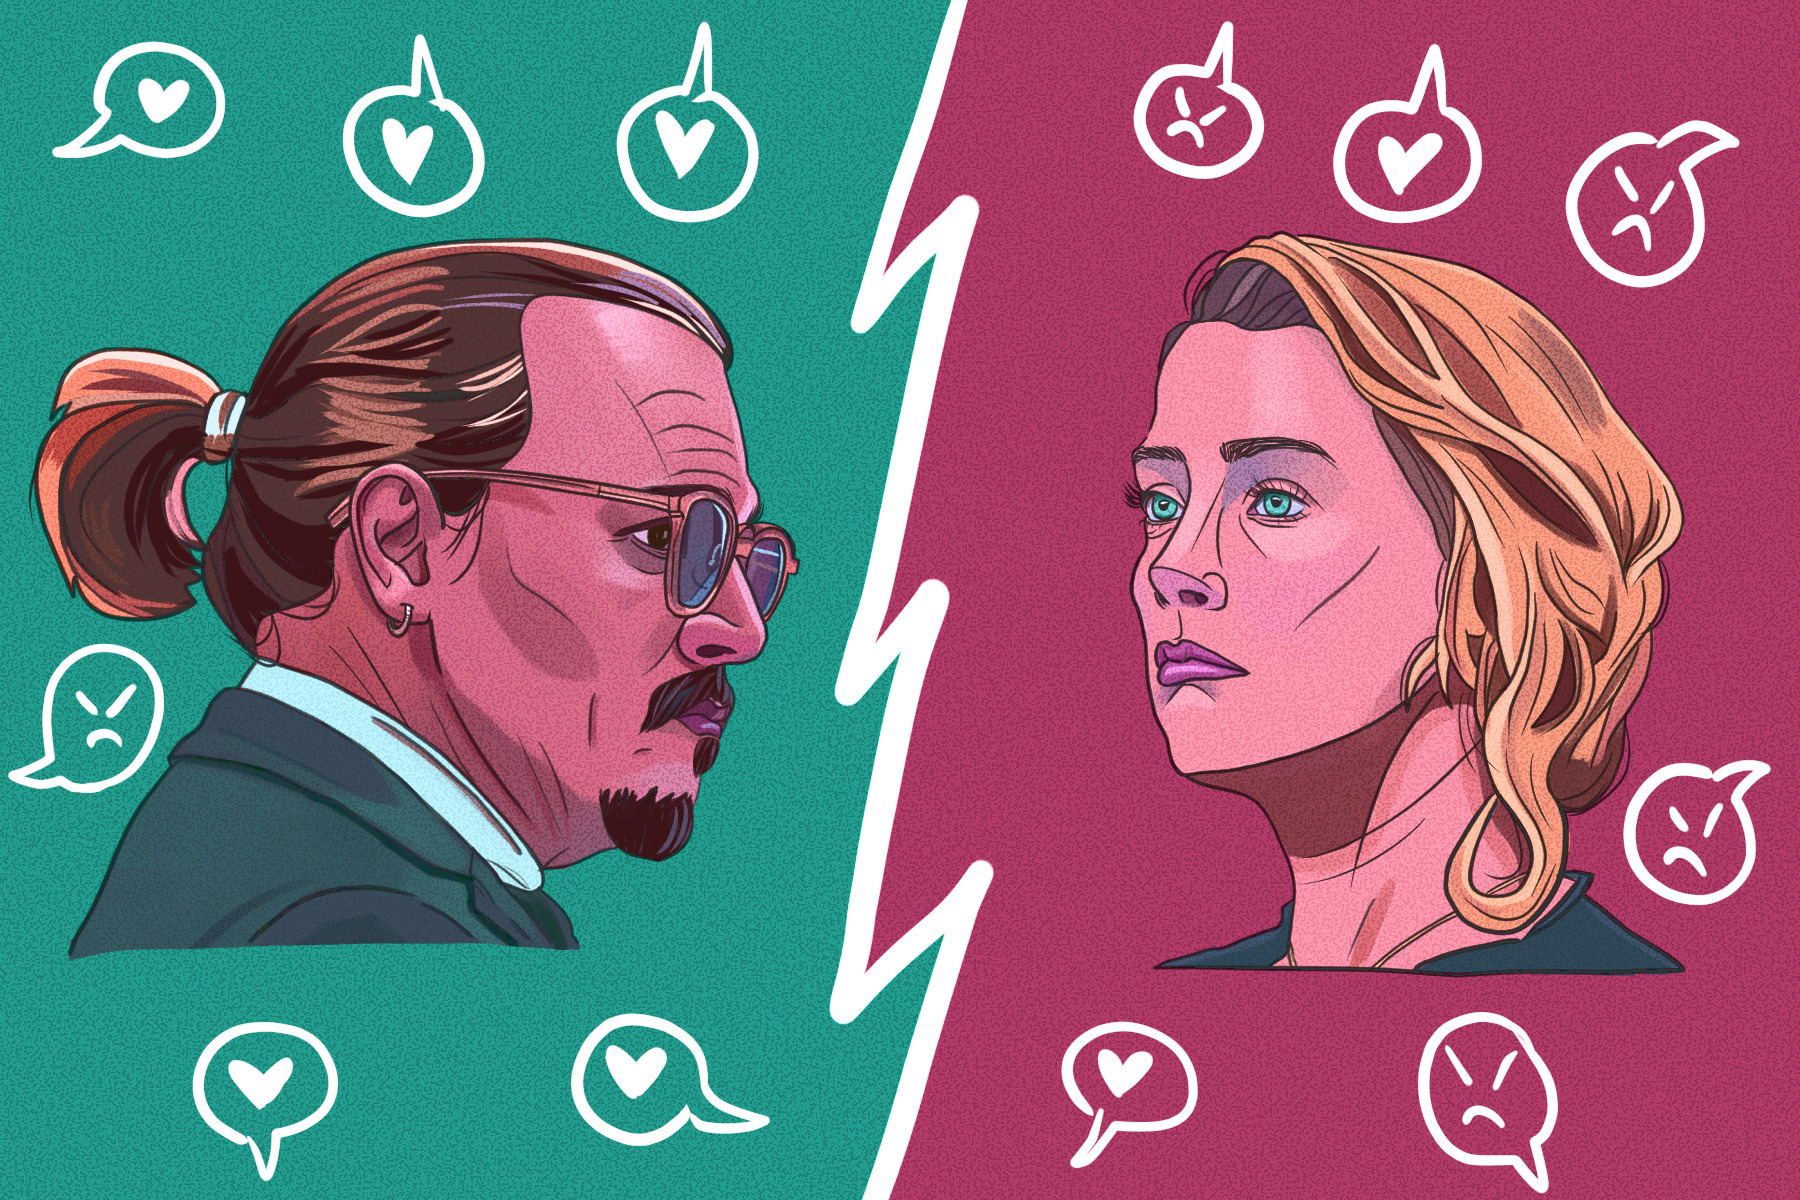 In an article about the Depp v Heard case, an illustration of the two.